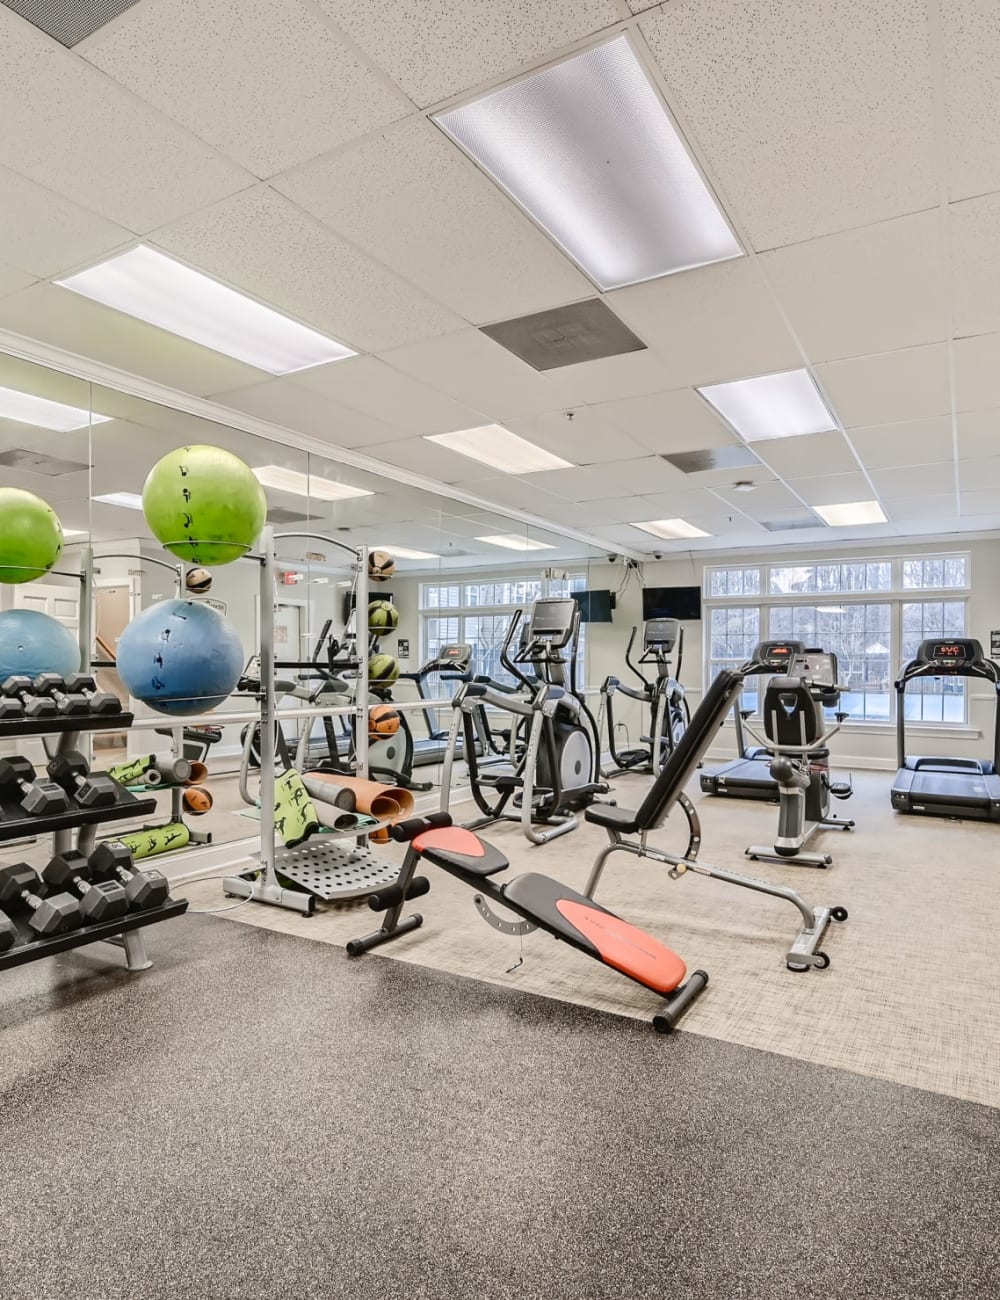 Exercise equipment in the fitness center at Park at Kingsview Village in Germantown, Maryland